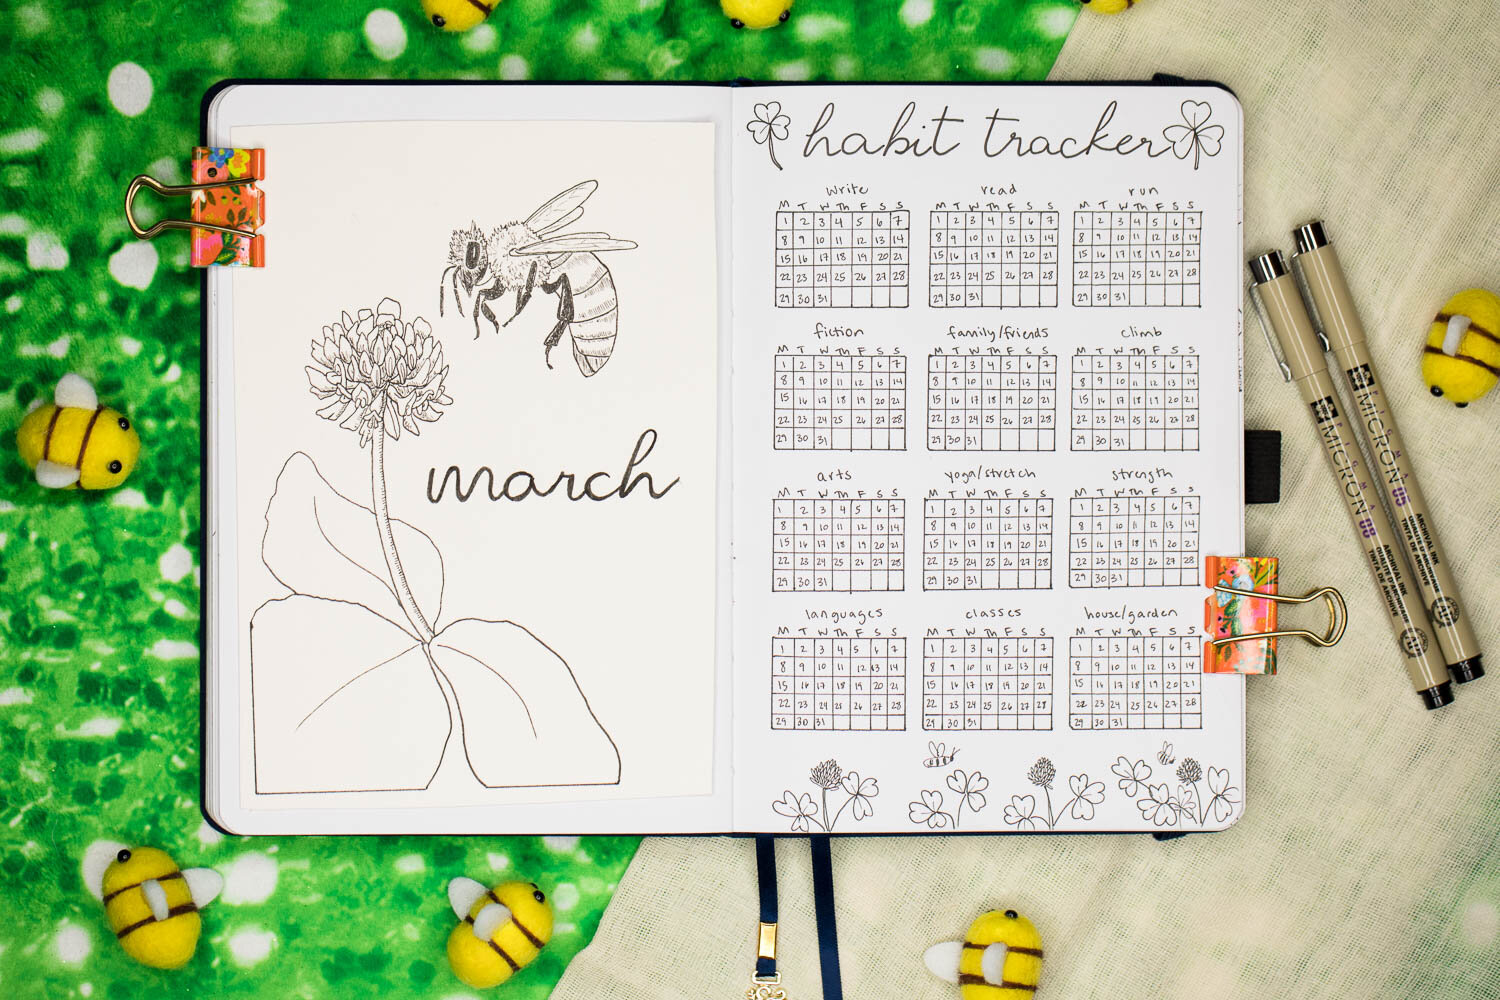 April Plan With Me - Archer and Olive Bullet Journal 